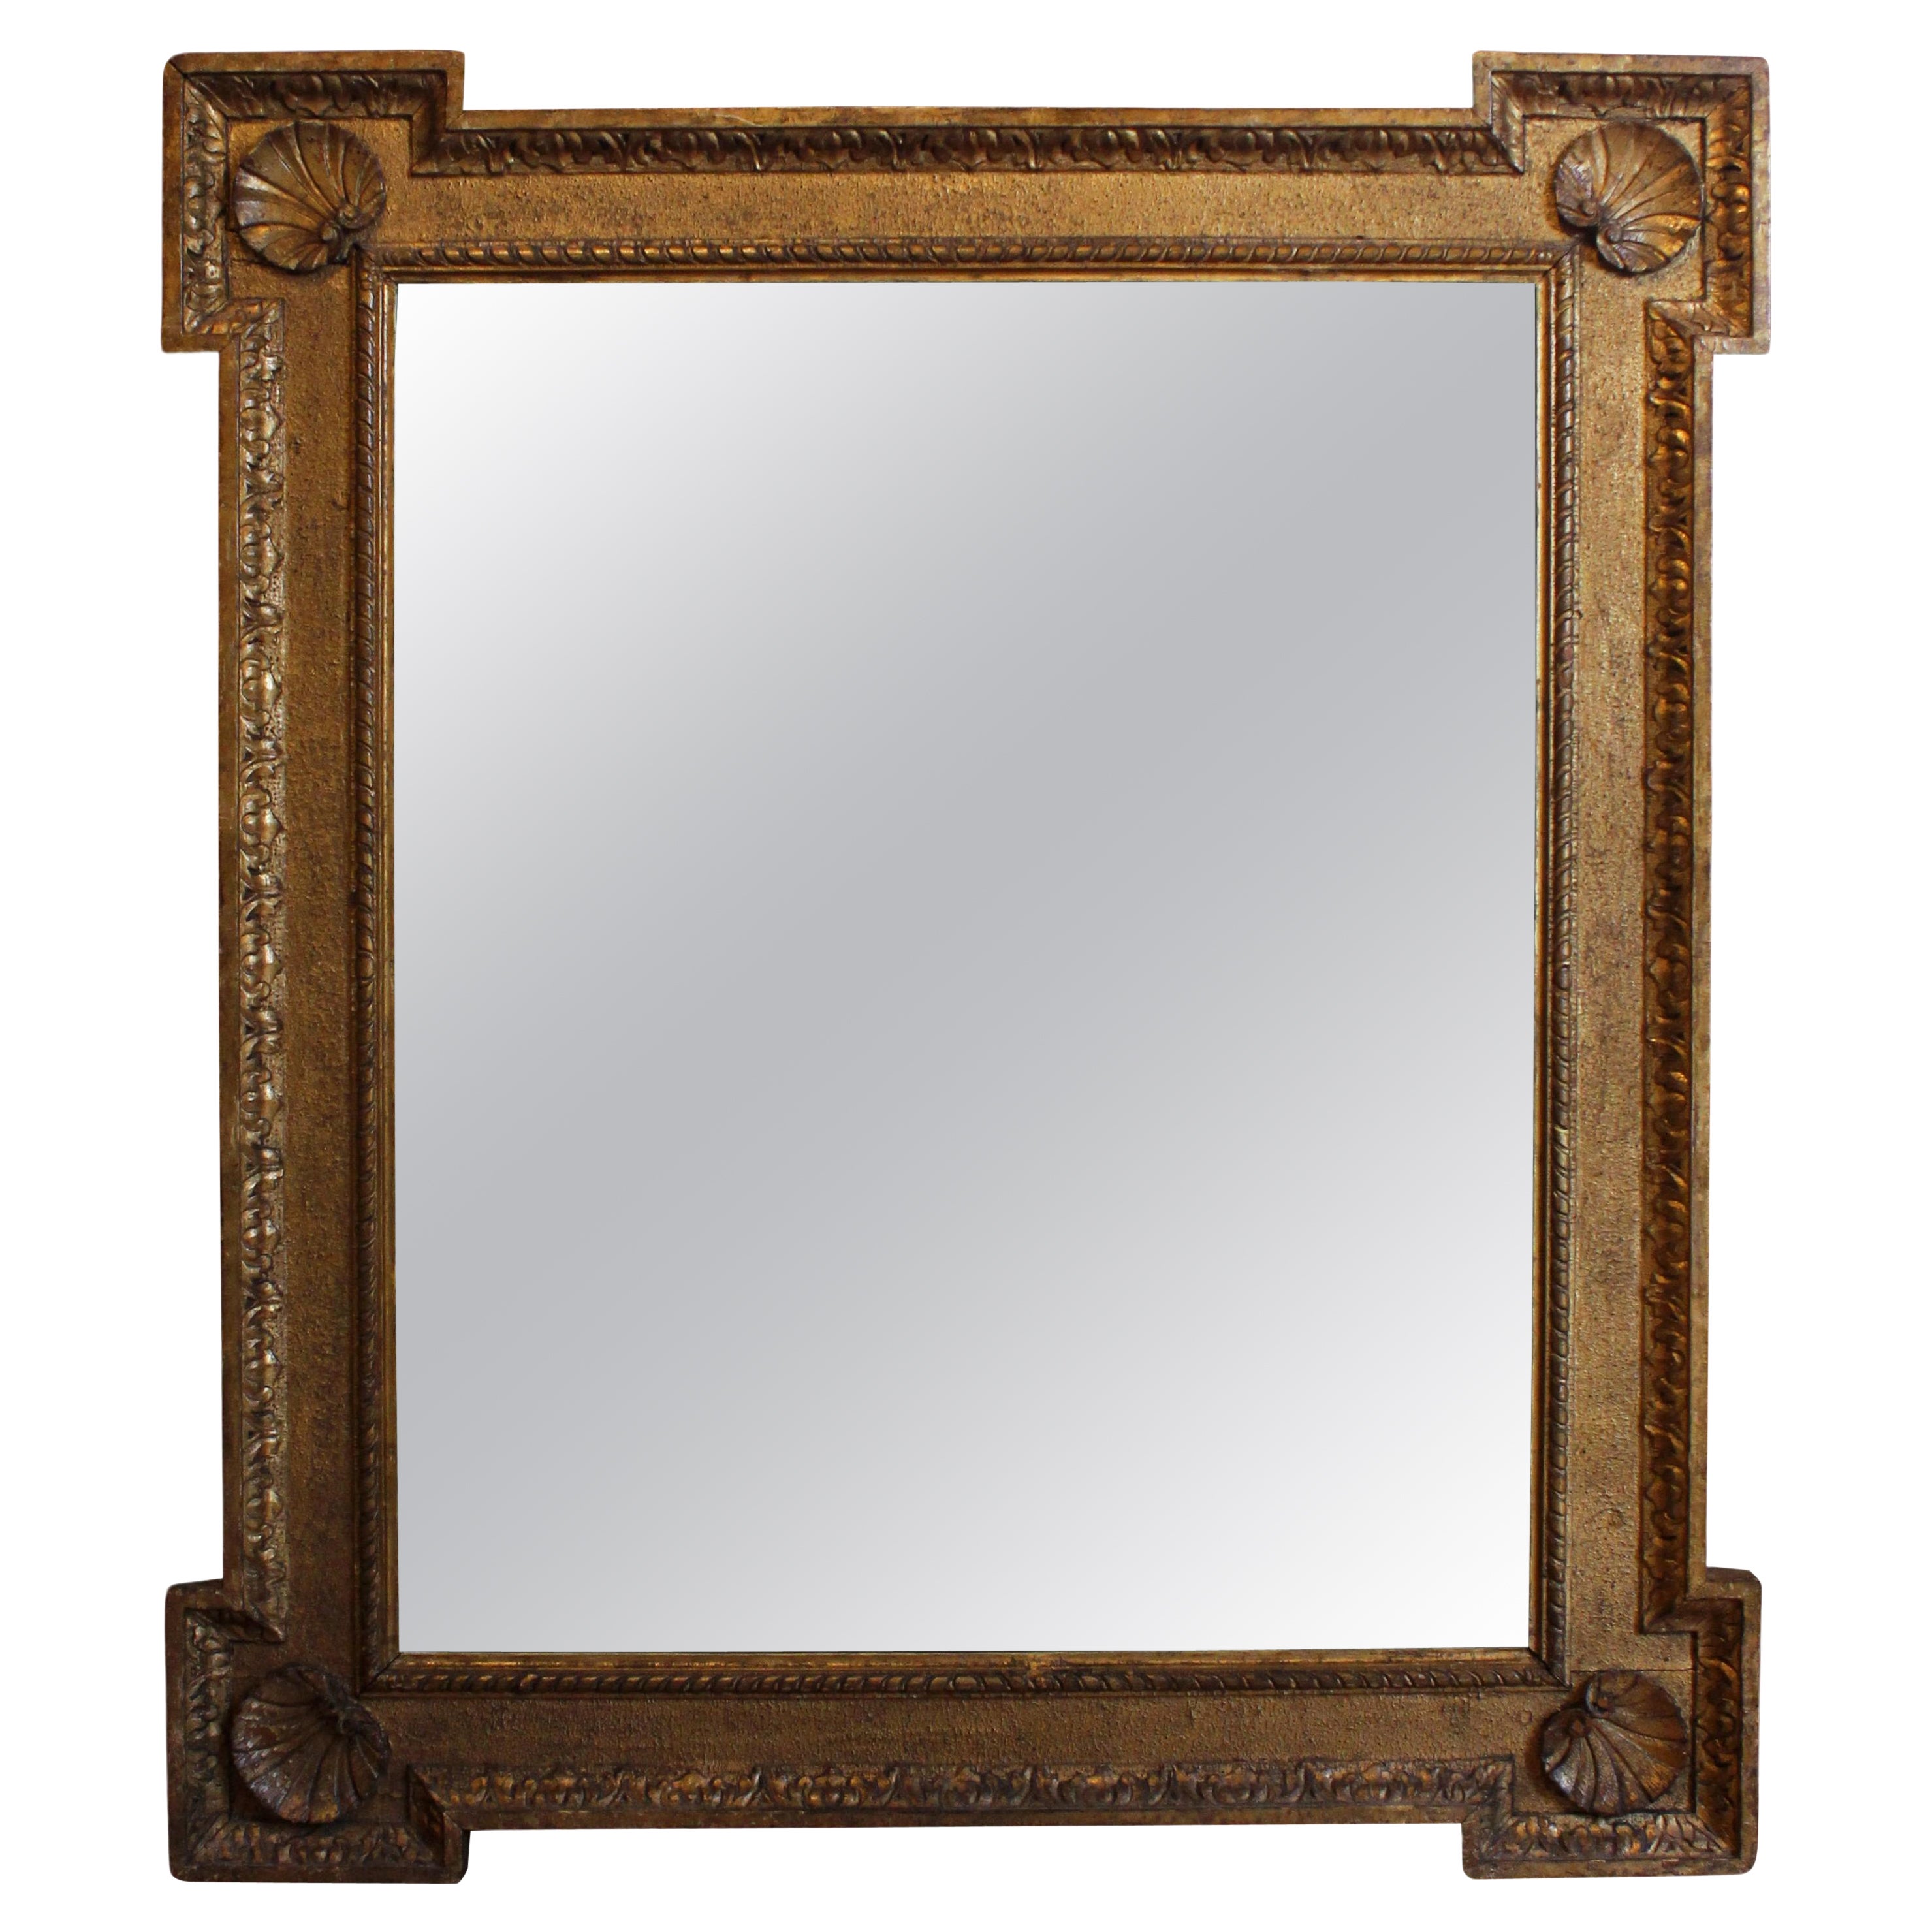 Late 19th Century English Gilt Mirror For Sale